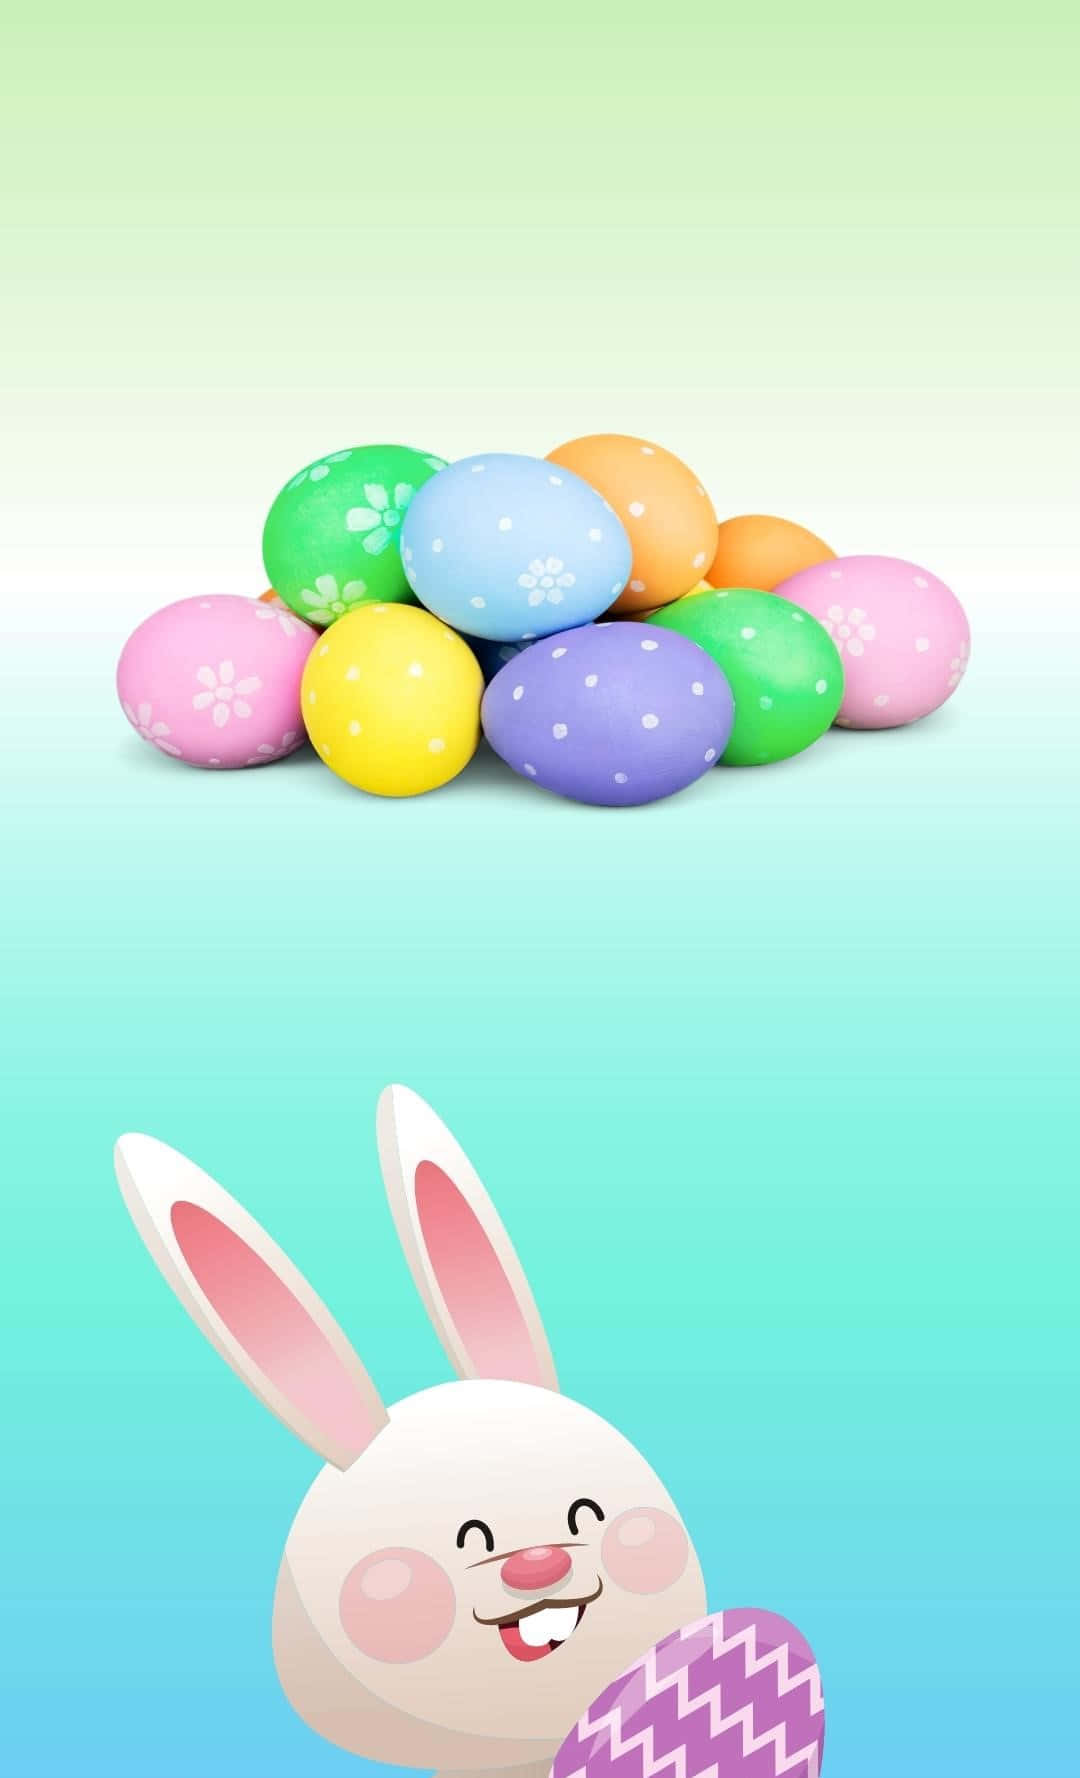 Celebrate Easter in style with this cute bunny iPhone wallpaper Wallpaper